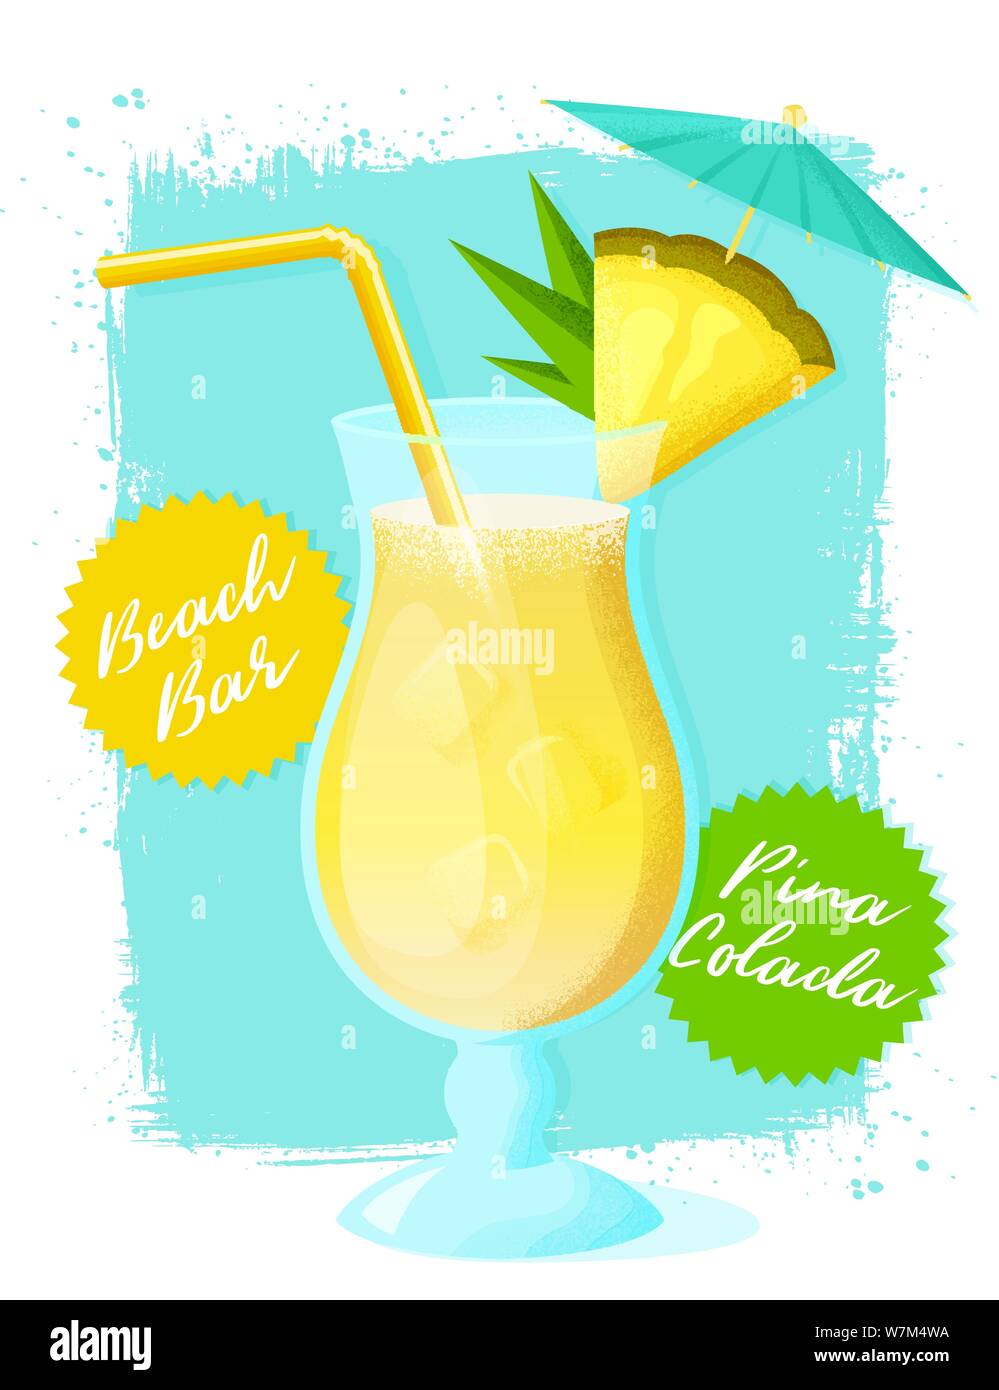 Pina Colada cocktail with pineapple slice, straw and umbrella. Poster with glass of alcoholic drink on grunge background. Vector illustration. Stock Vector